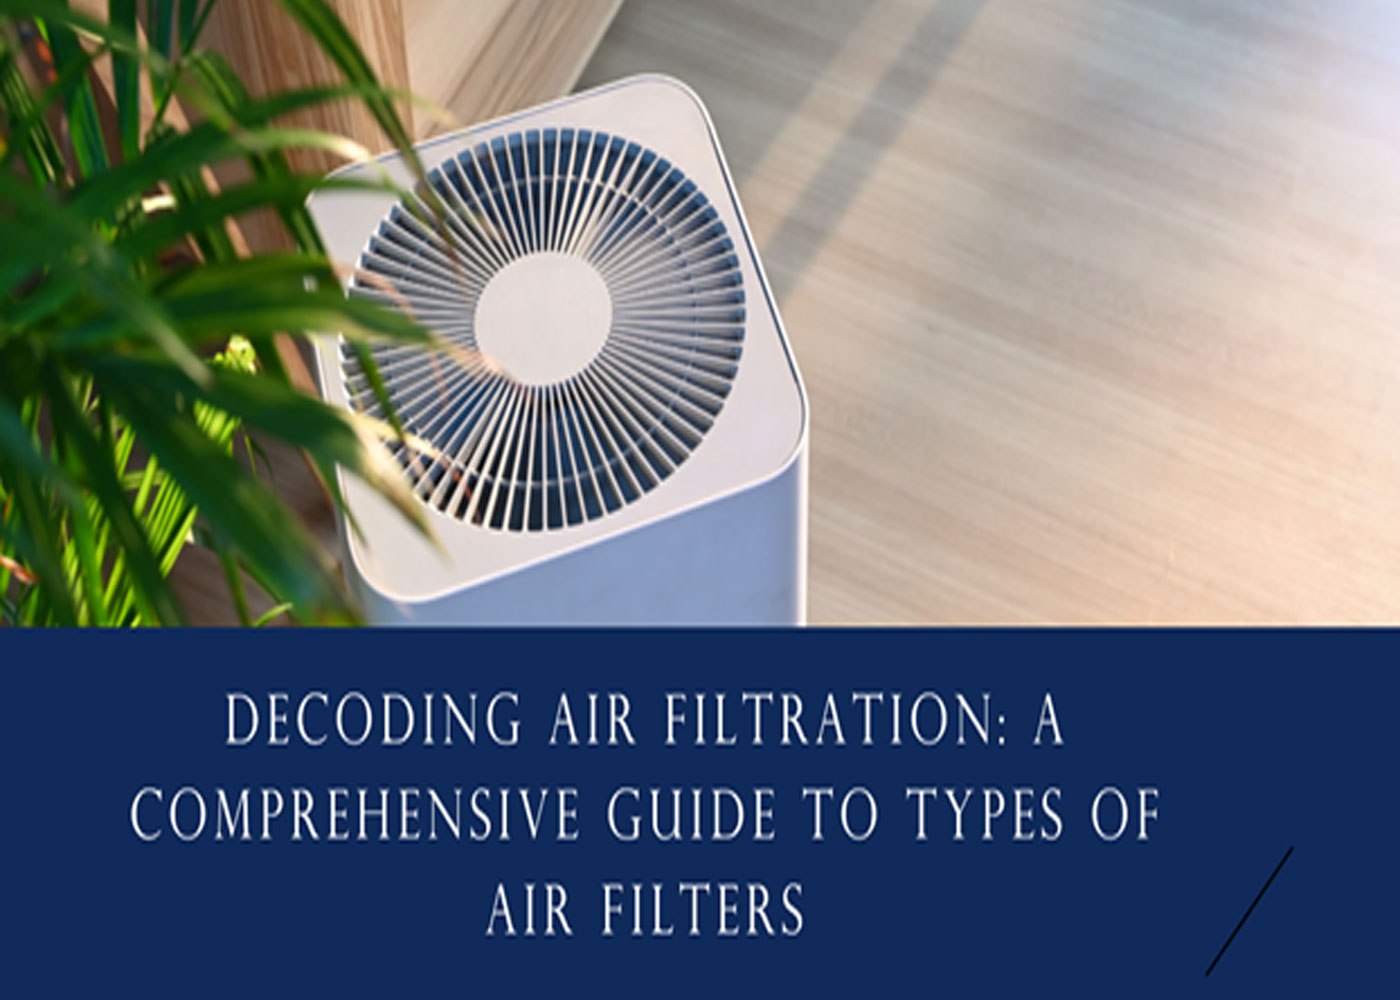 Decoding Air Filtration: A Comprehensive Guide To Types Of Air Filters